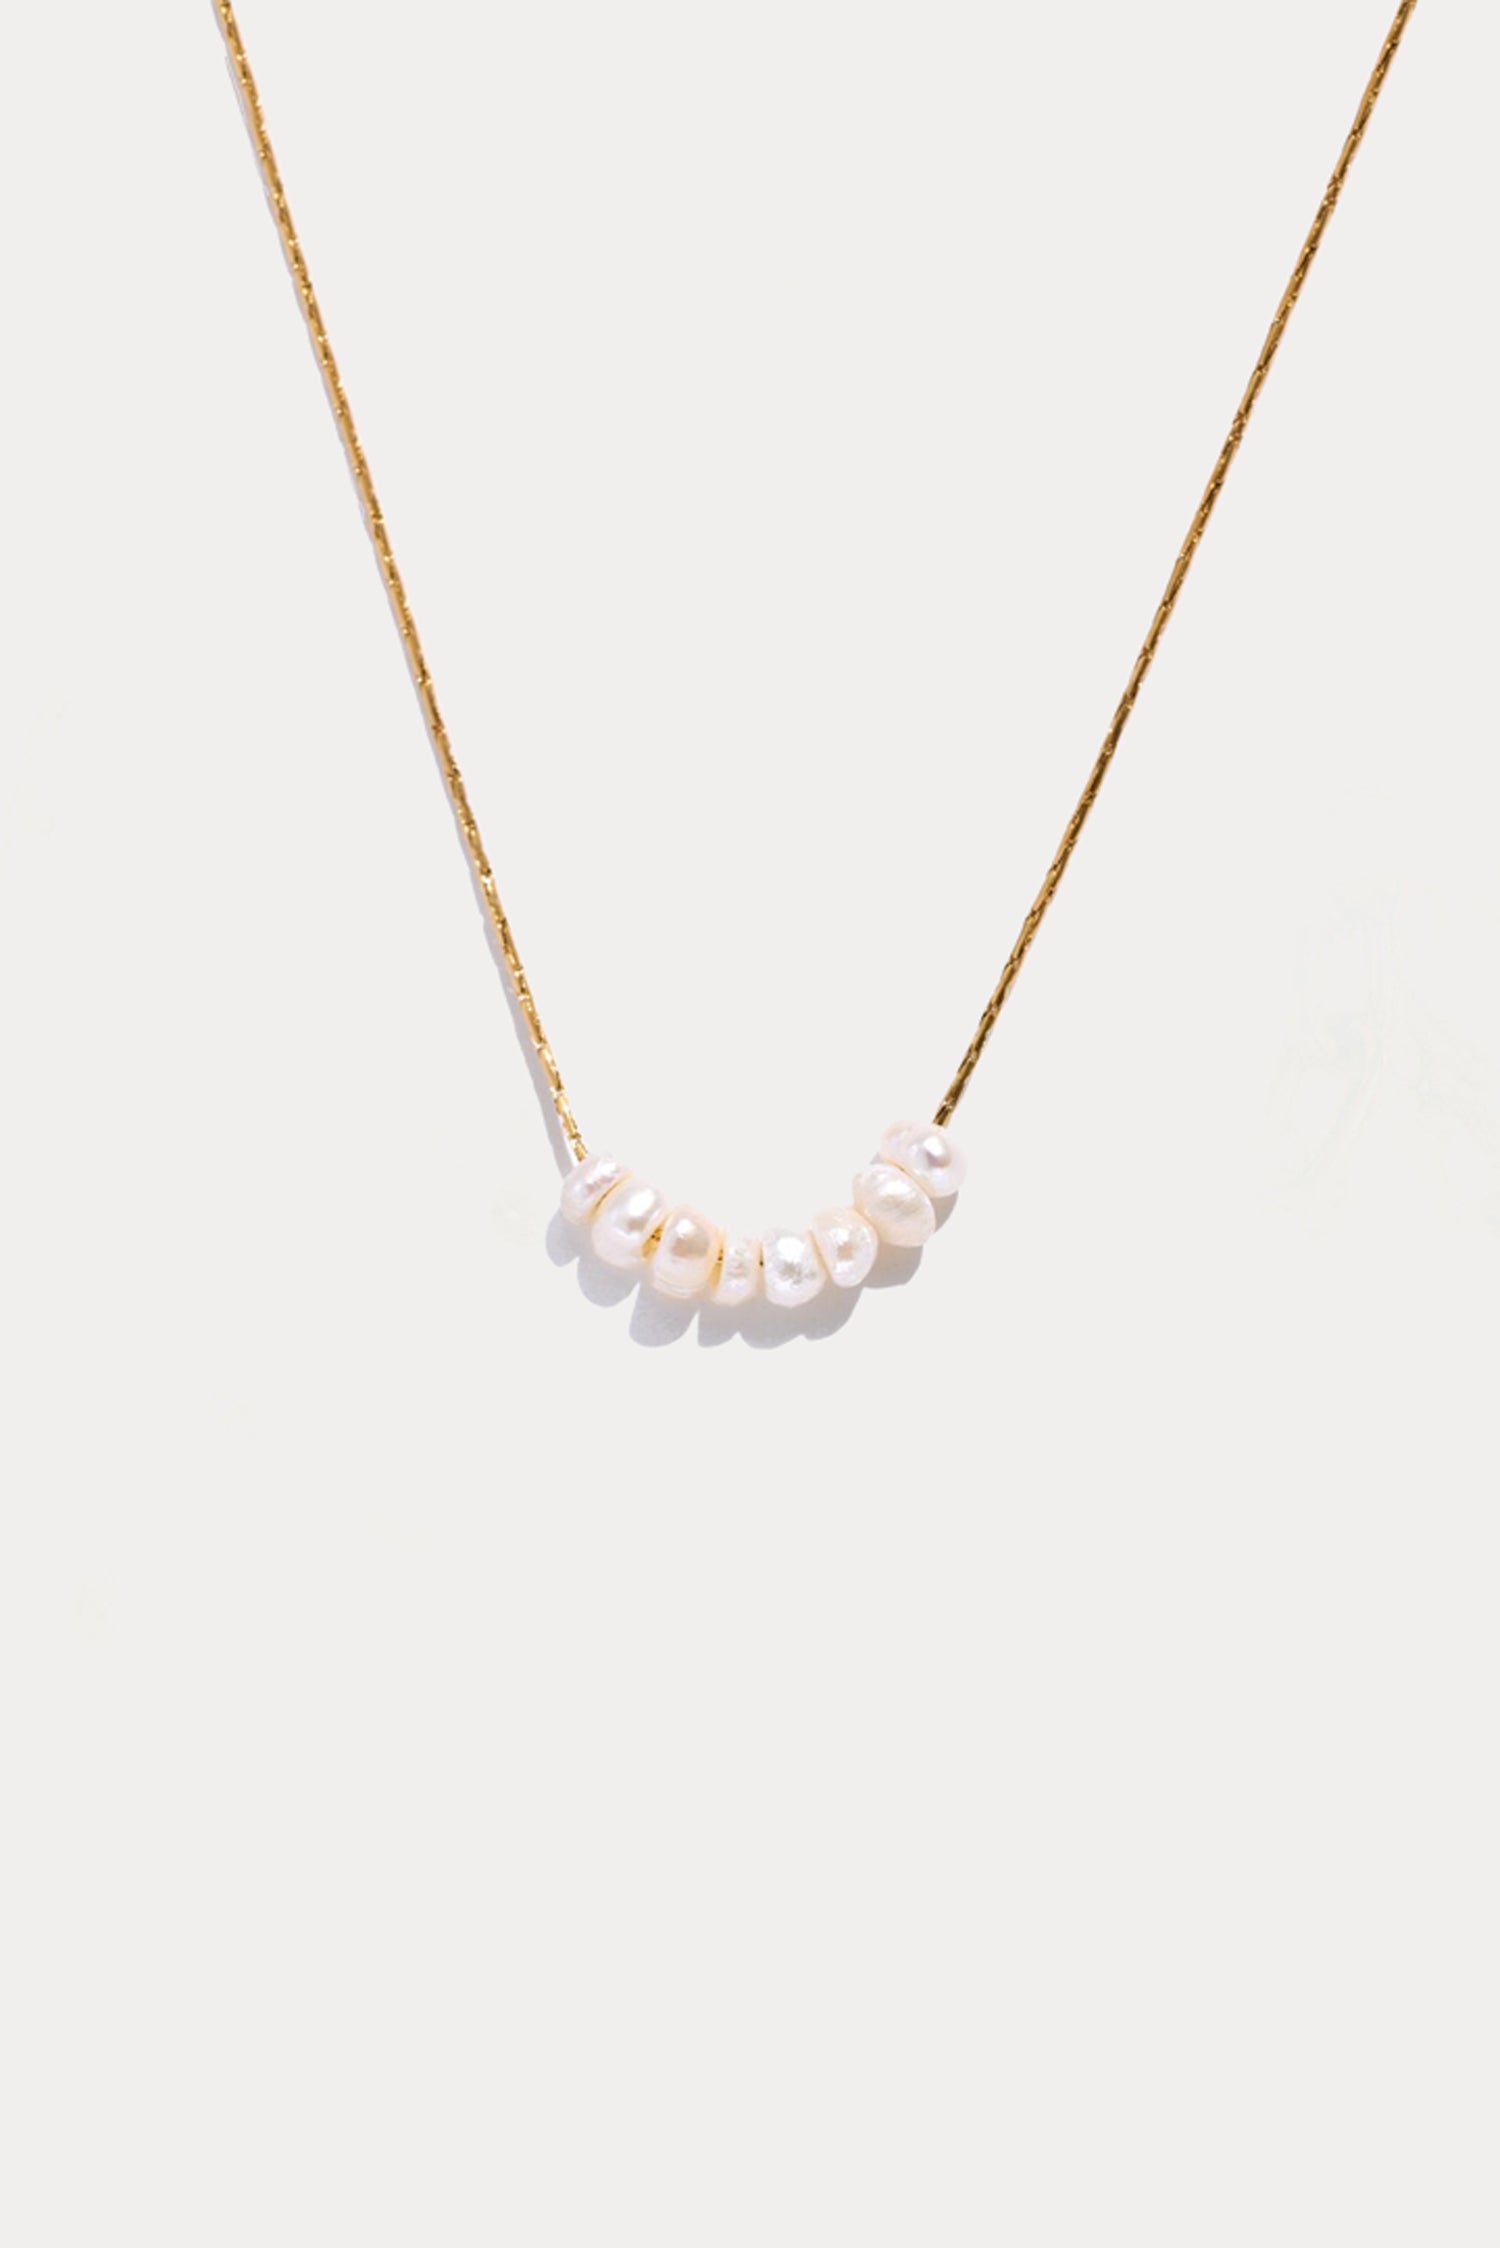 Tiny perle necklace